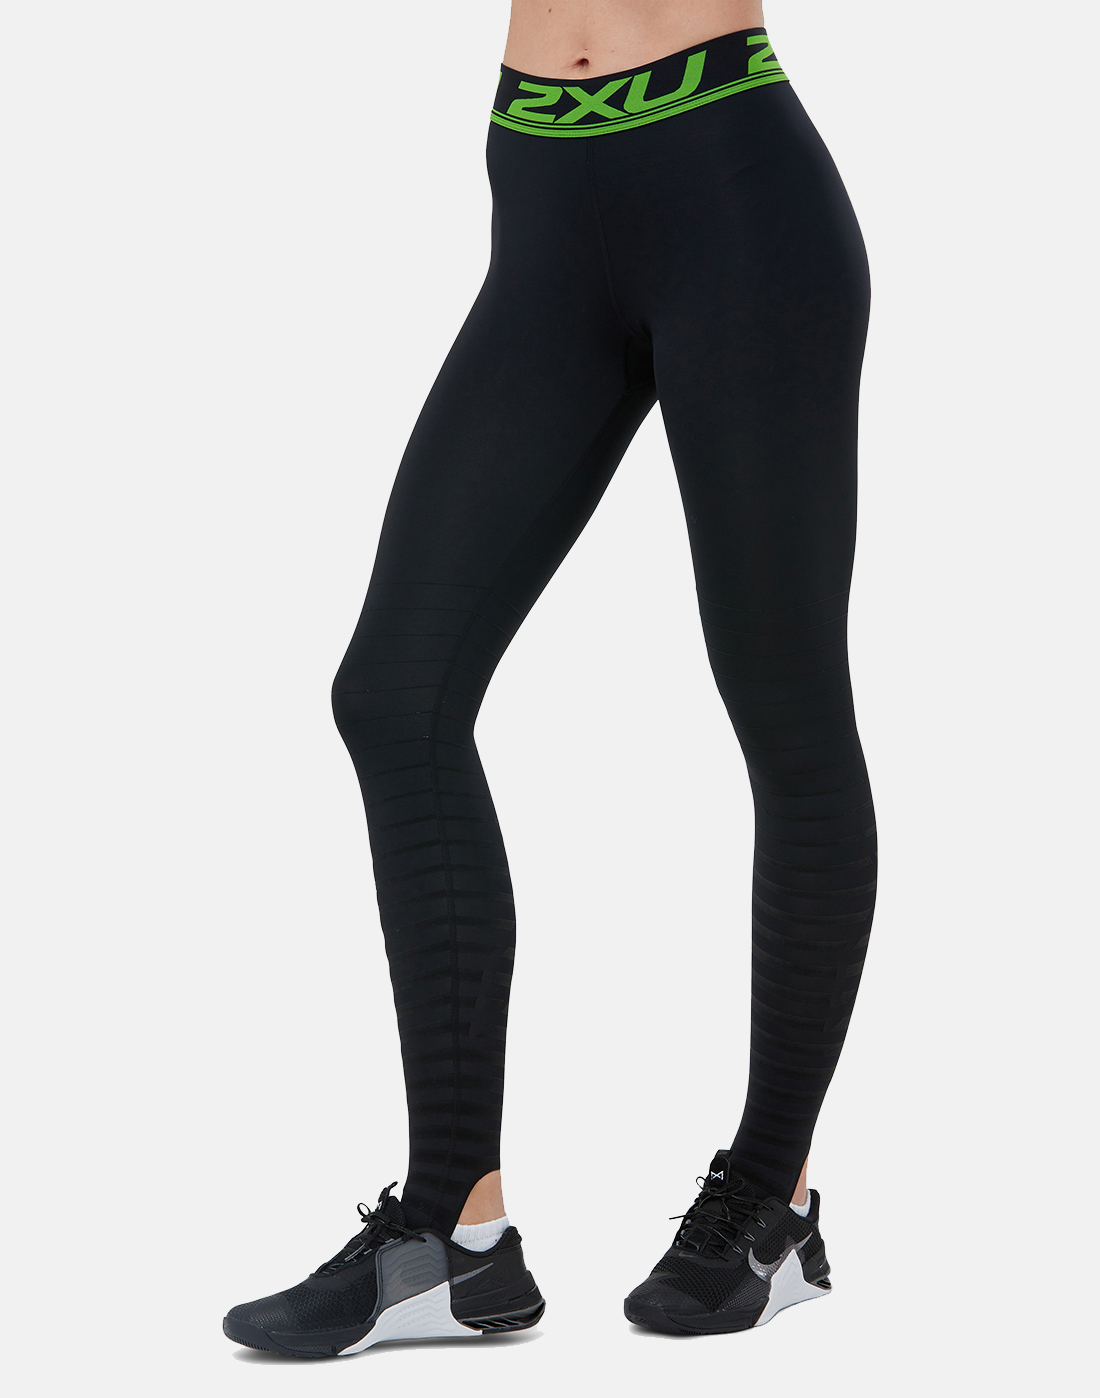 Womens Power Recovery Compression Leggings - Black | Life Style Sports IE